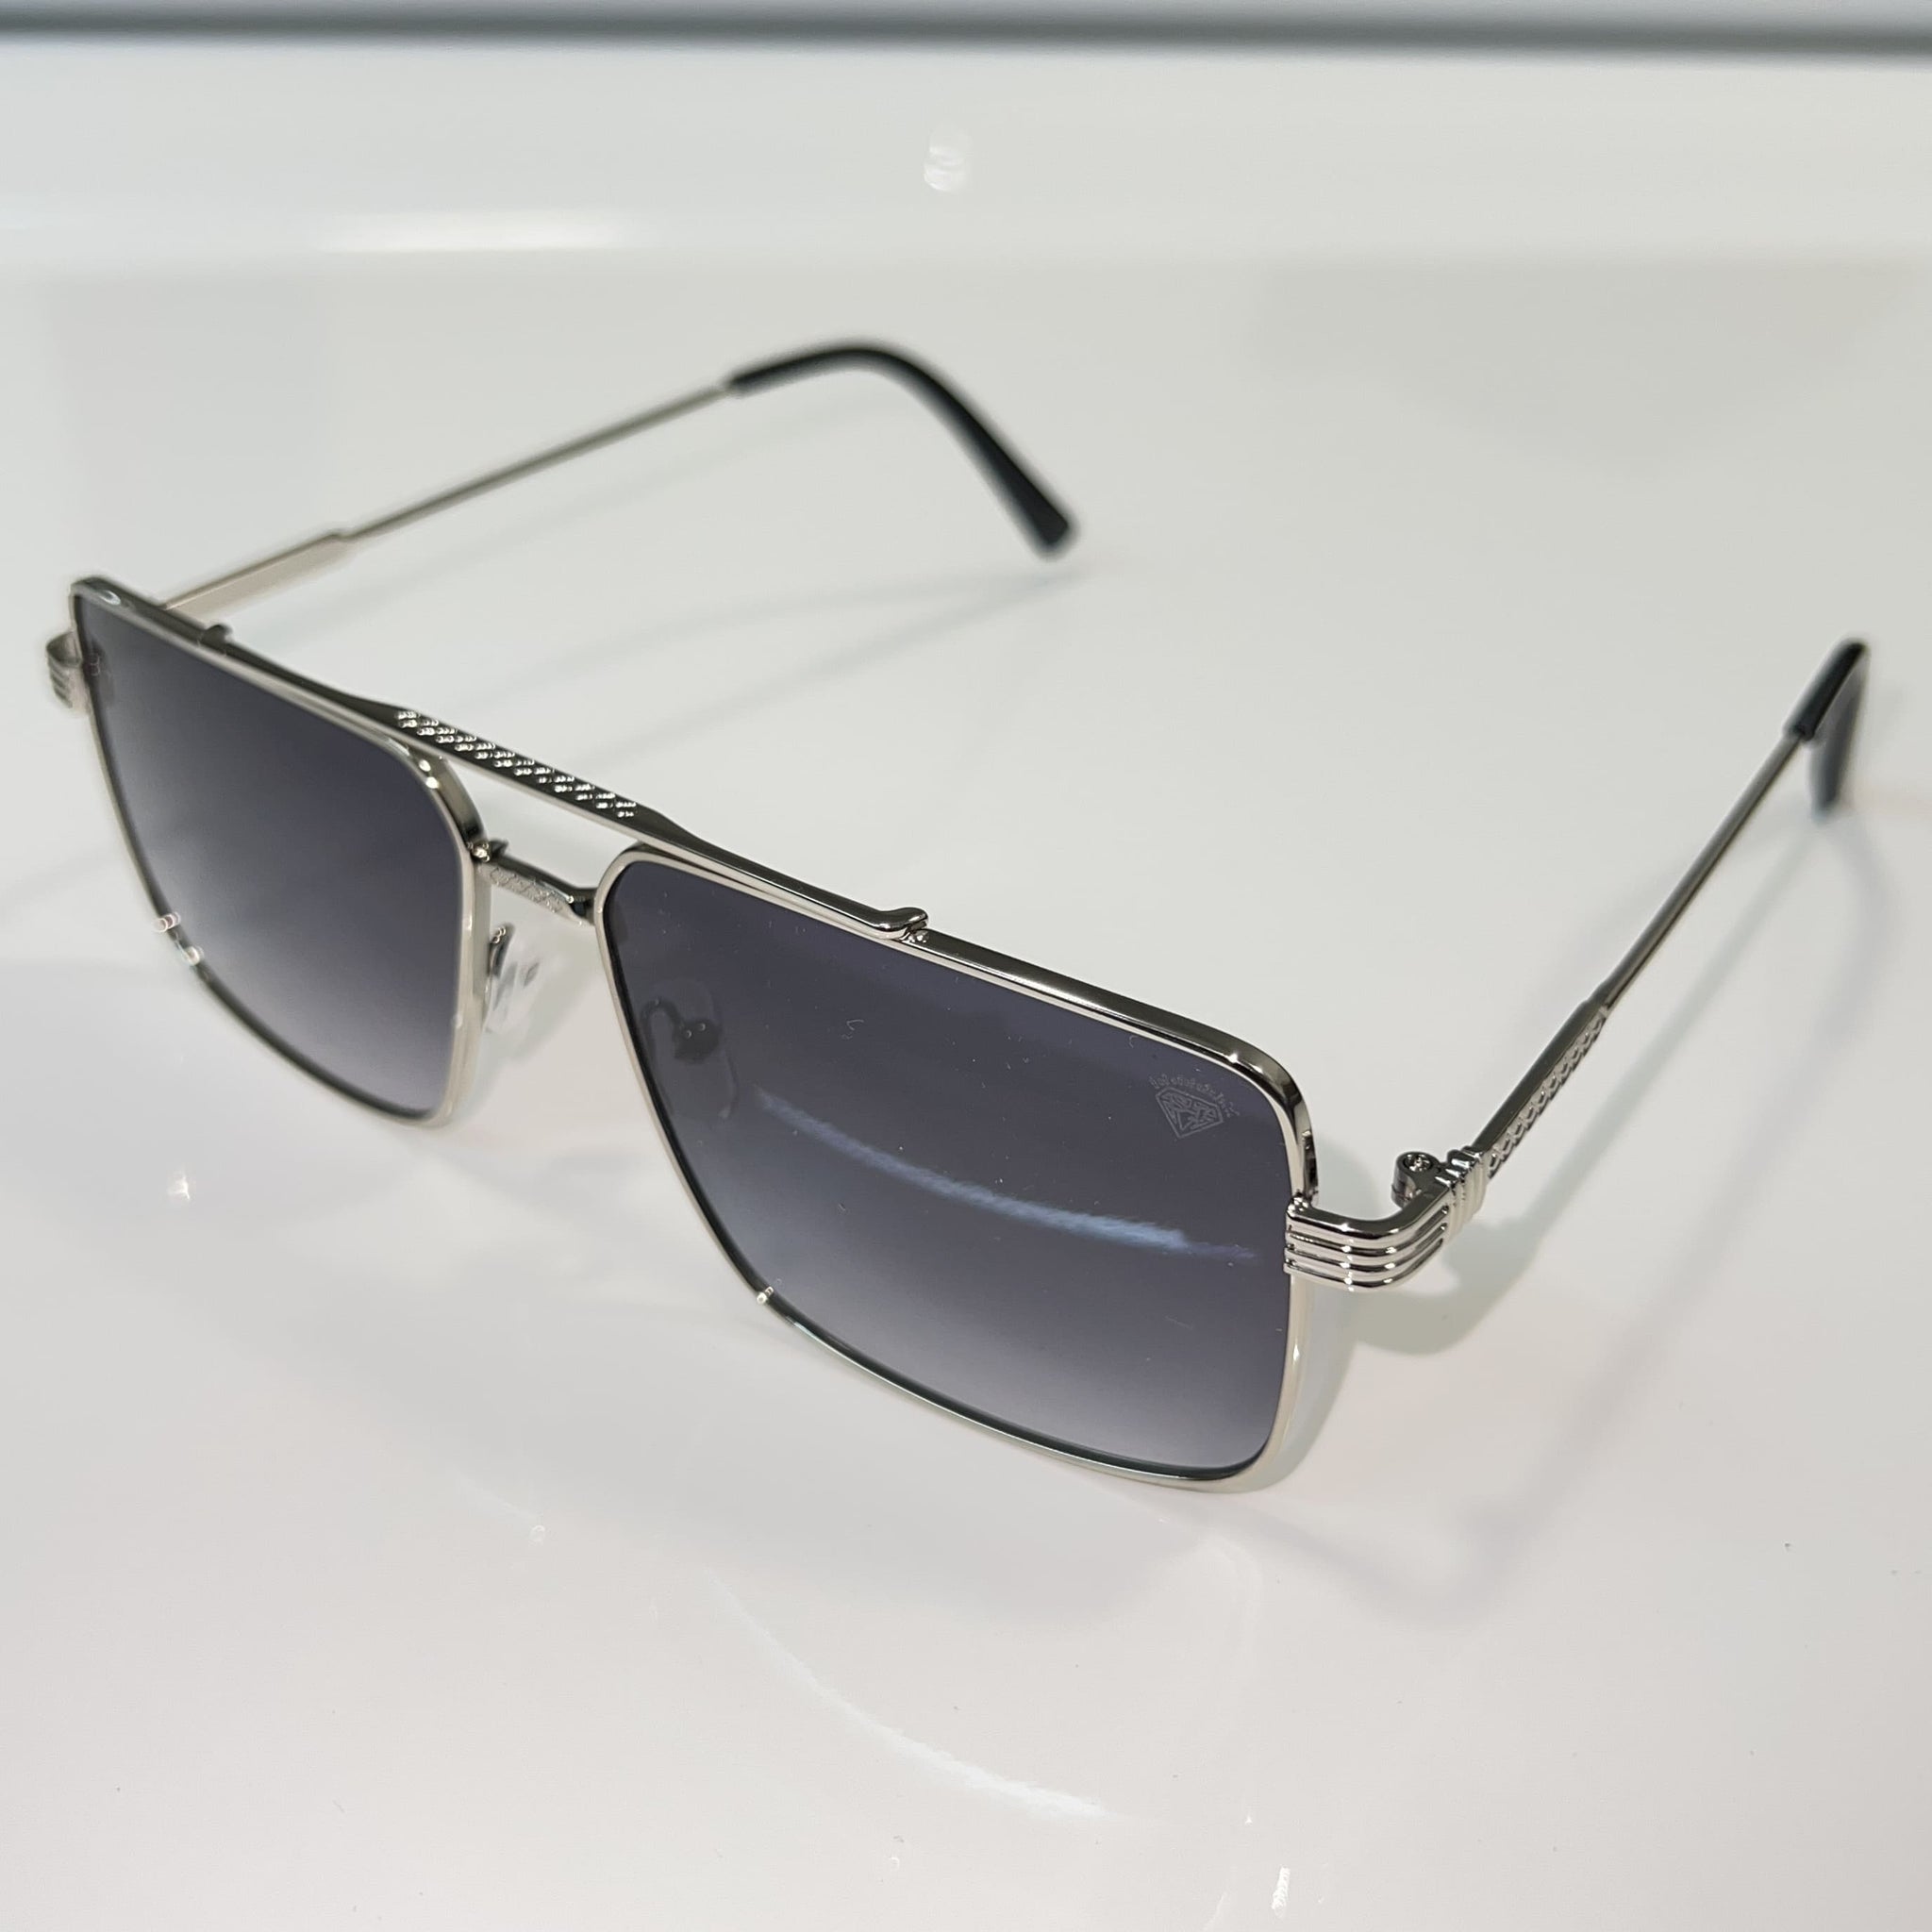 Billionaire Glasses - Silver plated - Black Shade / Silver Frame - Sehgal Glasses